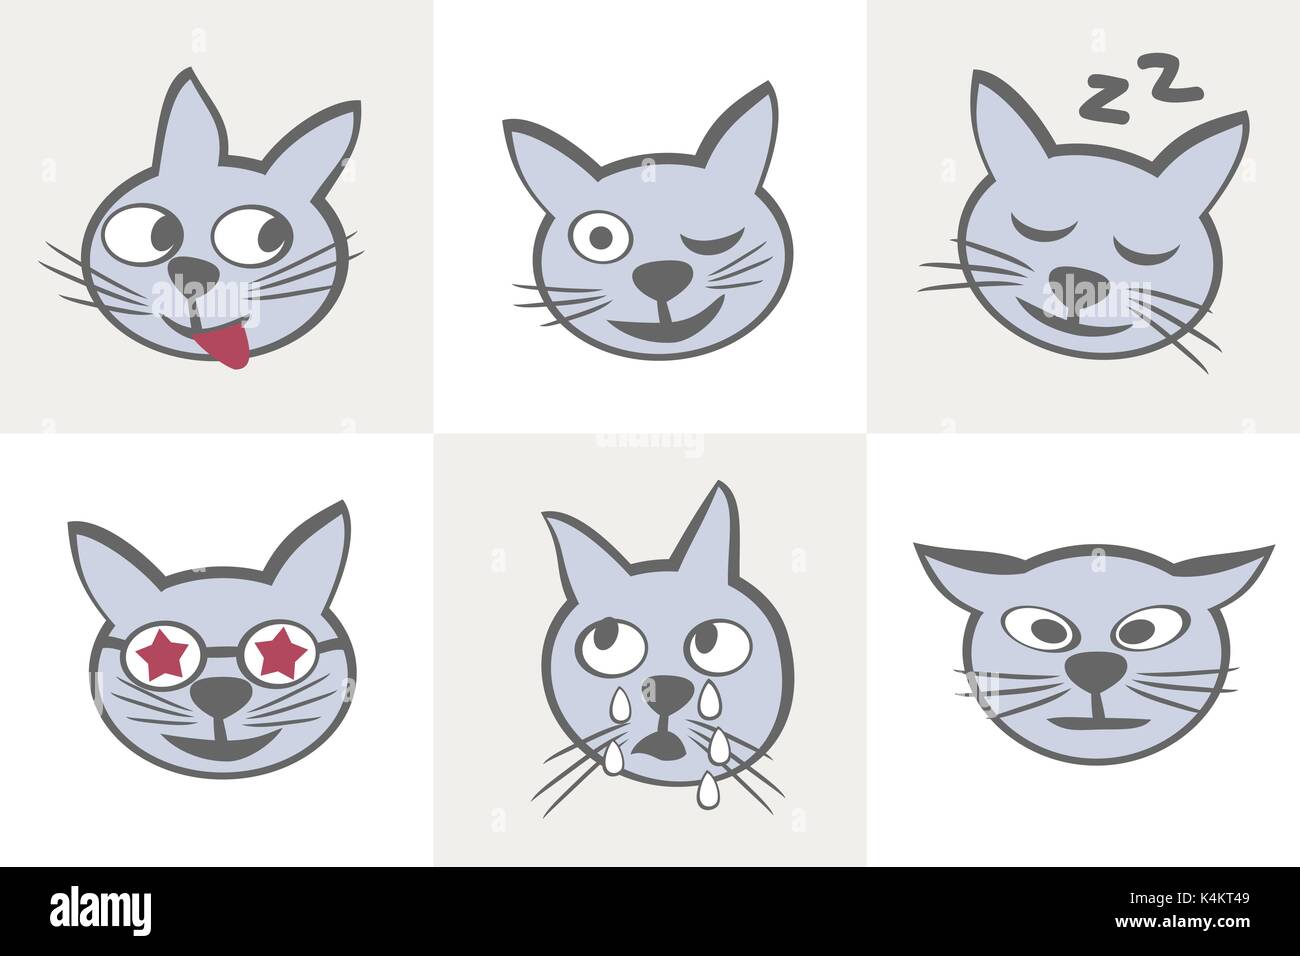 Cat characters. Different emotions. Stock Vector